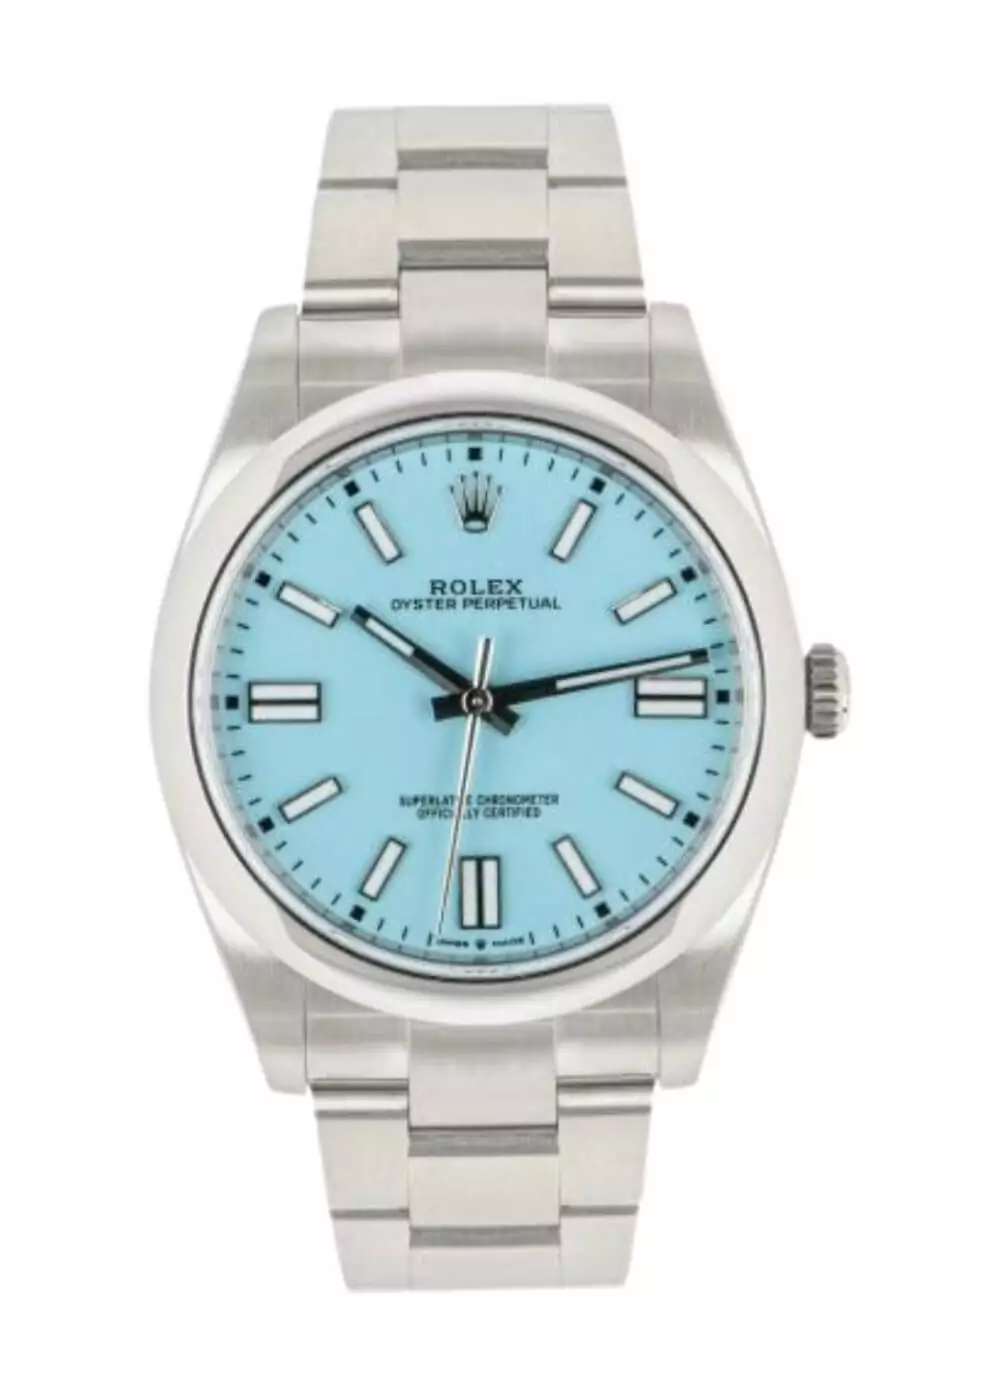 Rolex Oyster Perpetual Watches - luxurysouq